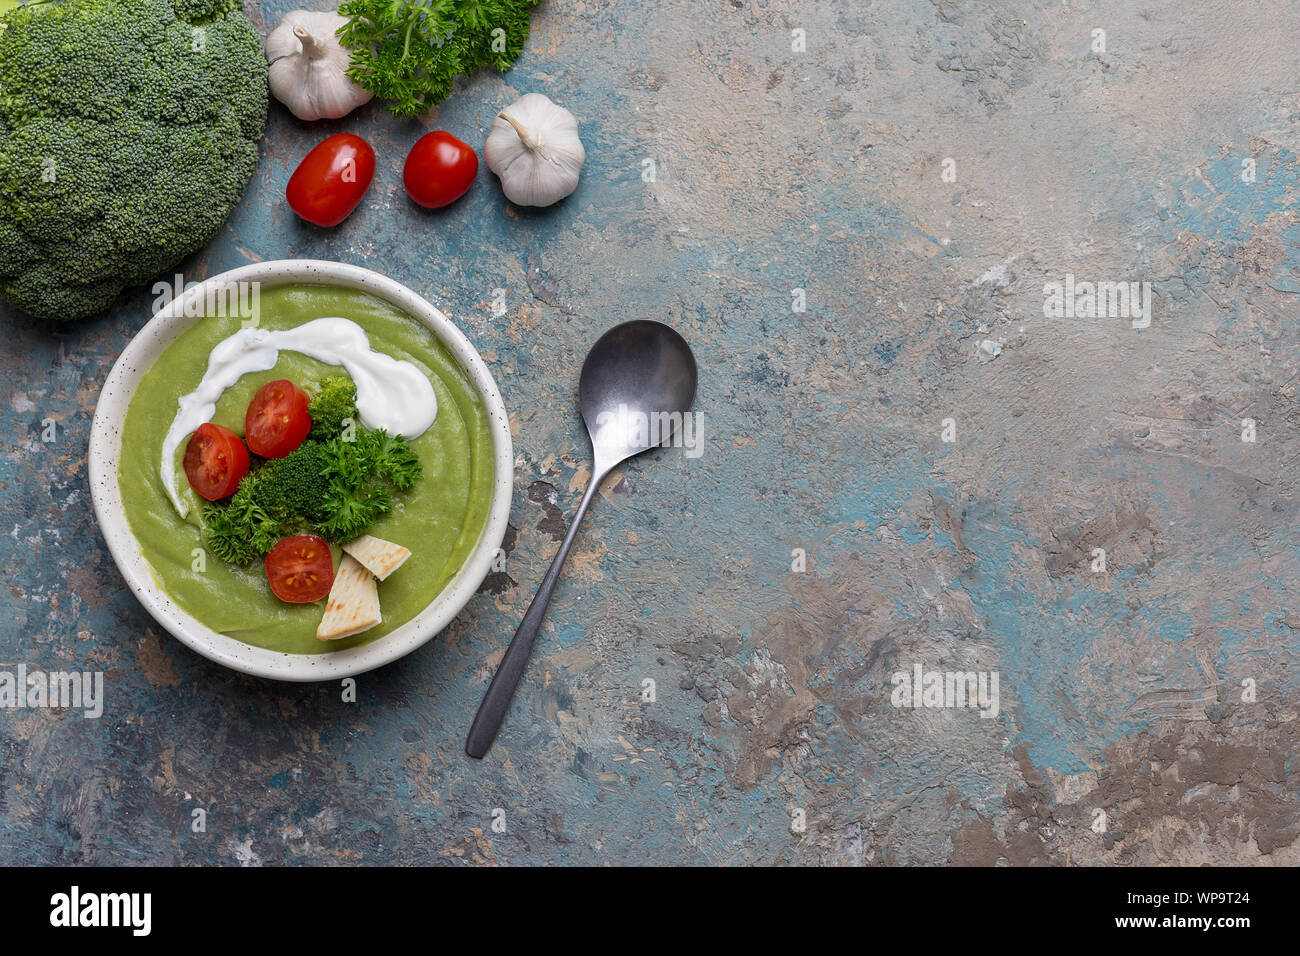 Cream soup with cream and broccoli and raw vegetables as tomatoes, garlic and parsley on blue concrete background. Concept of healthy food. Top view, Stock Photo